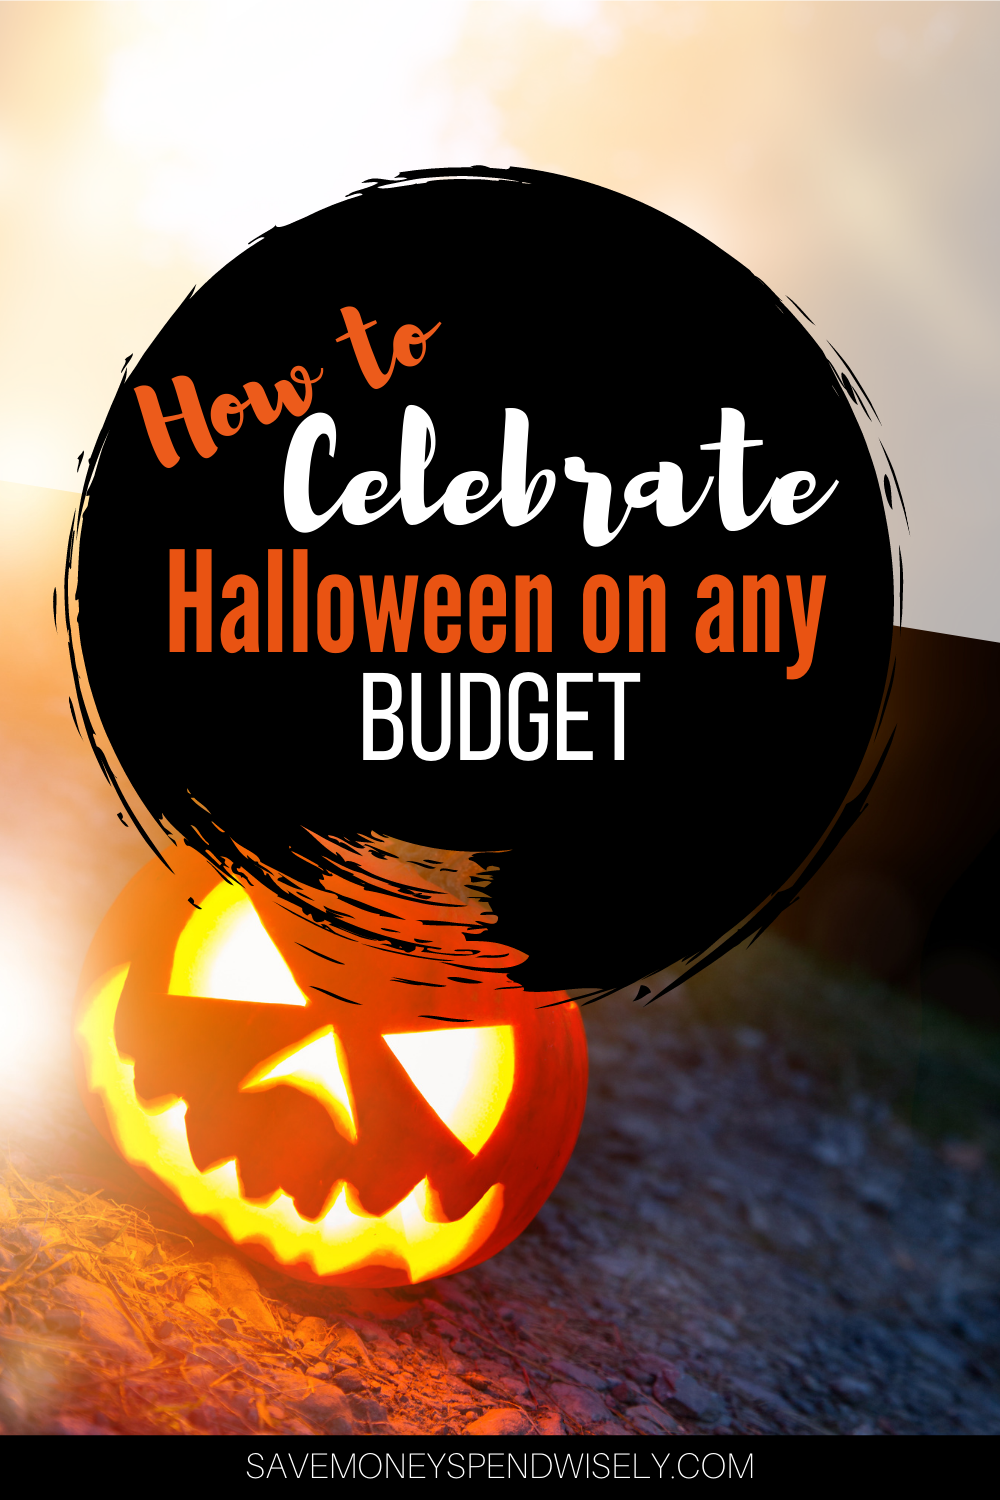 How to do Halloween on a Budget